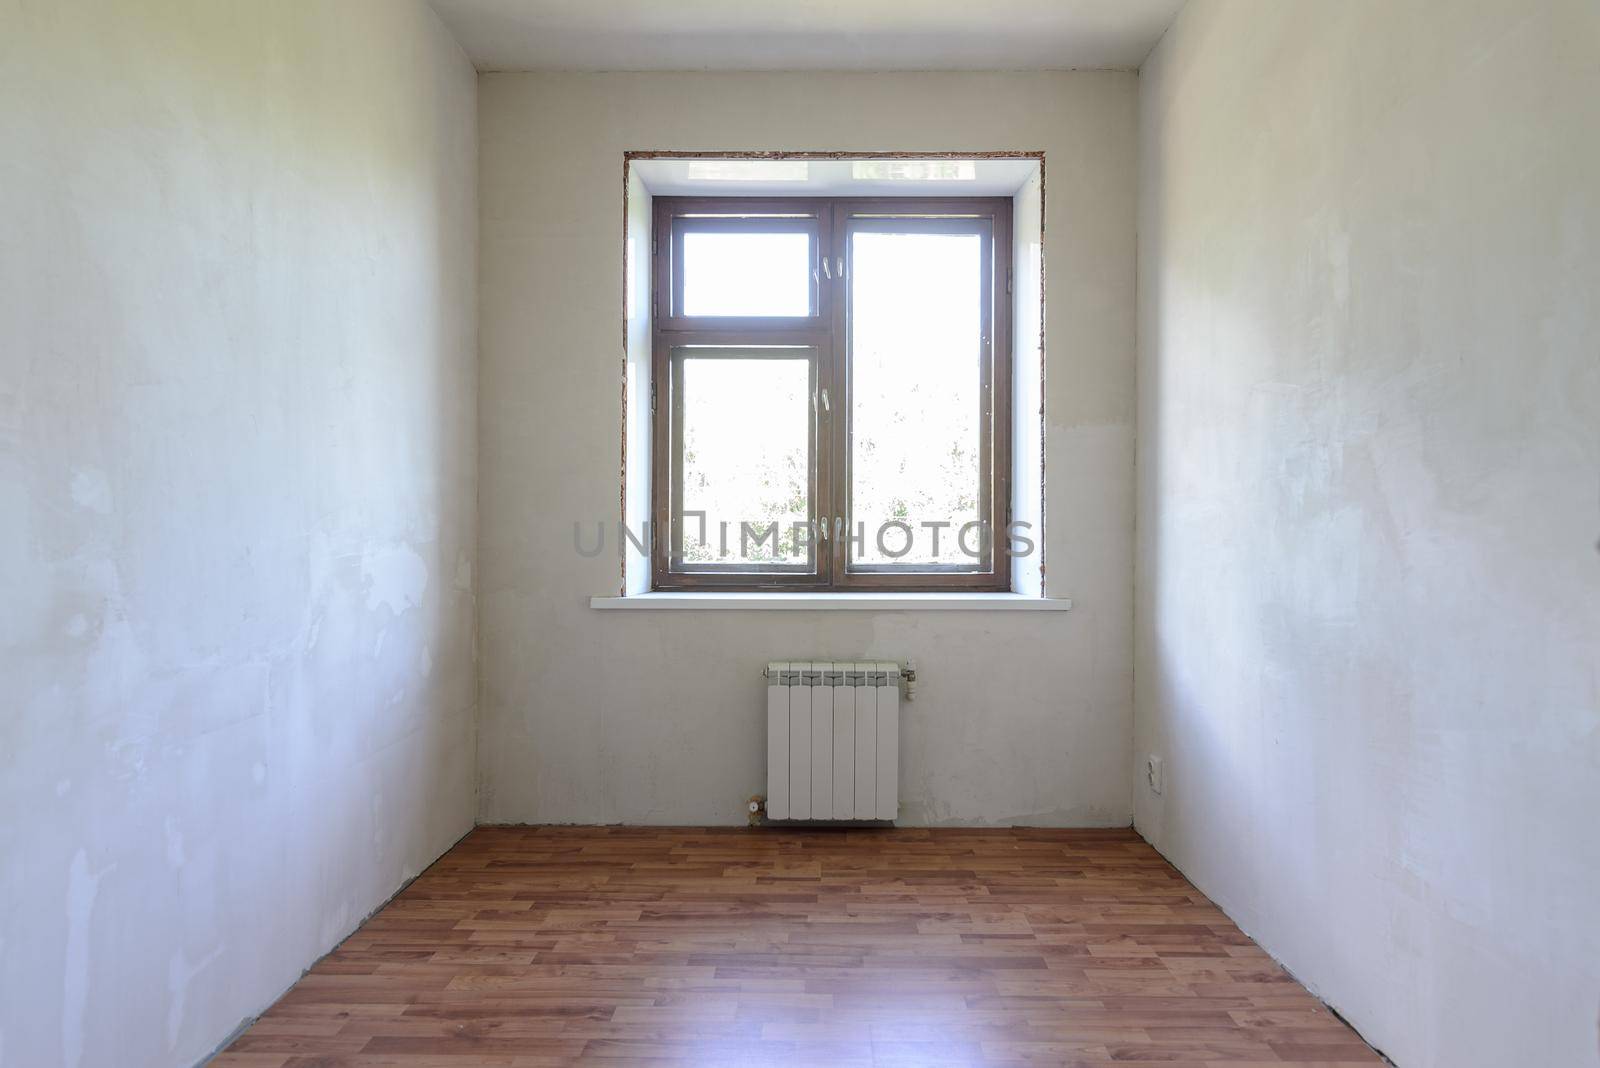 View of the window in a small room, the room has a laminate a